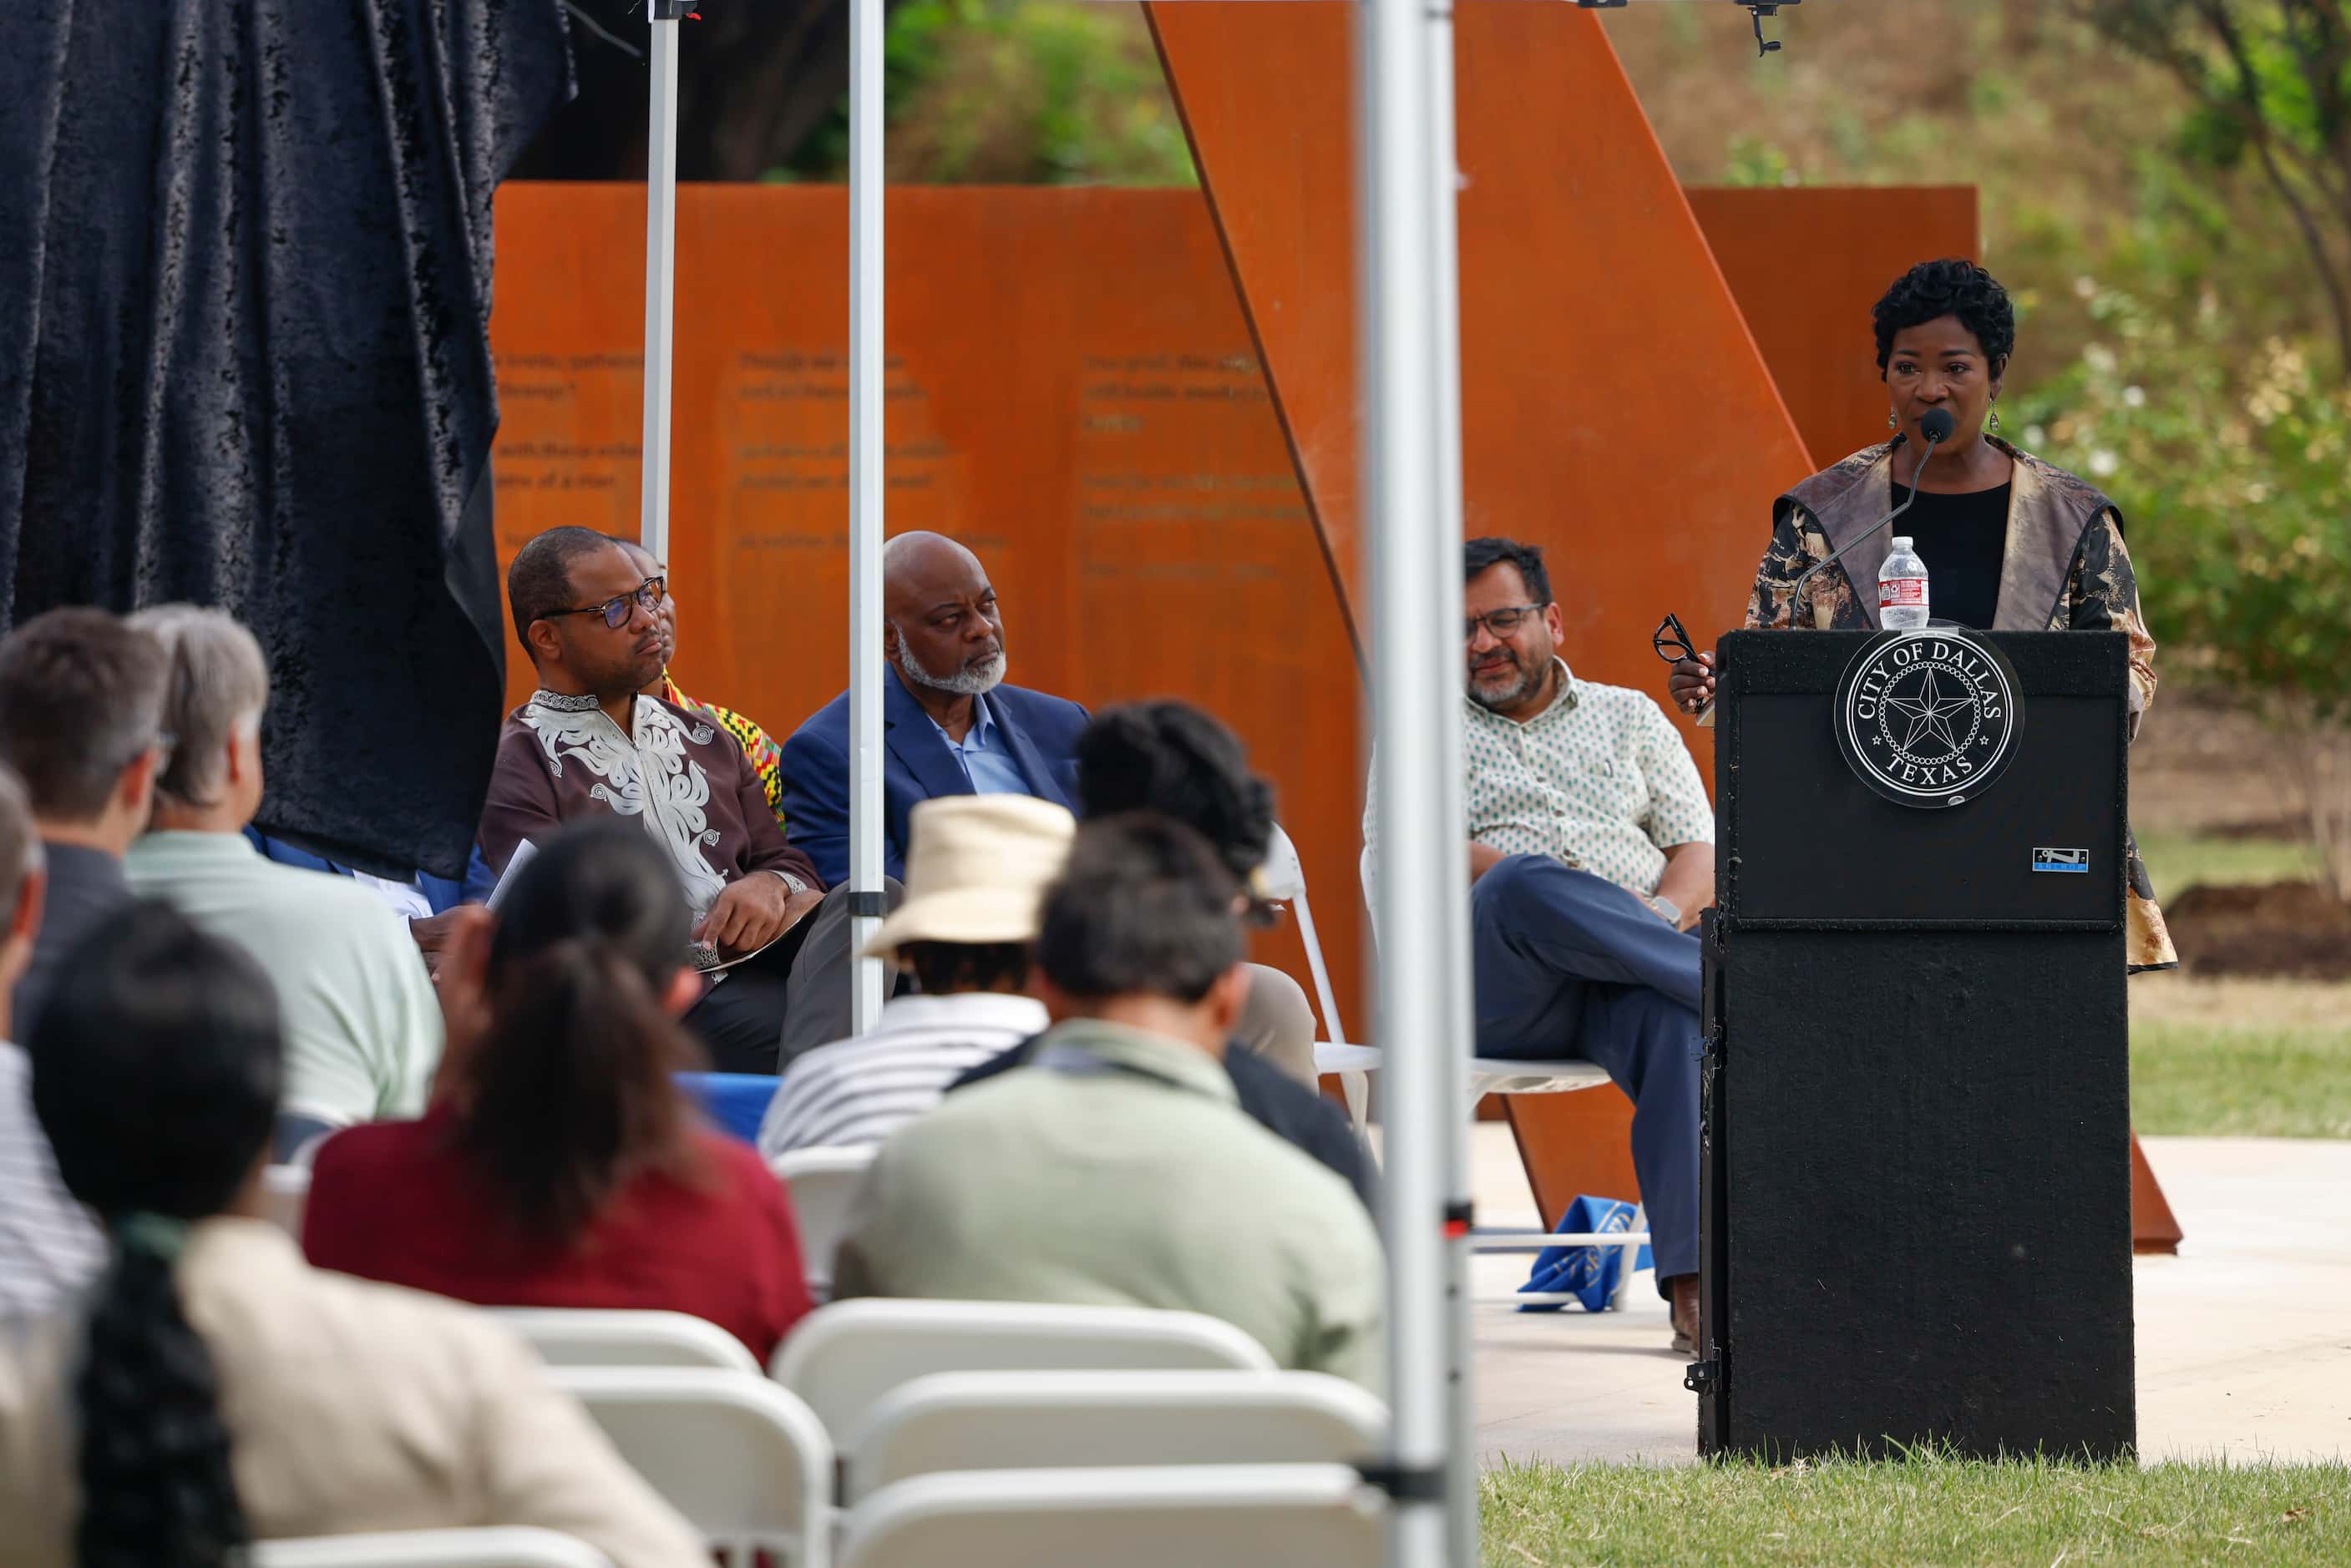 Dallas Interim City Manager Kimberly Tolbert told attendees to “hold onto our hope” and...